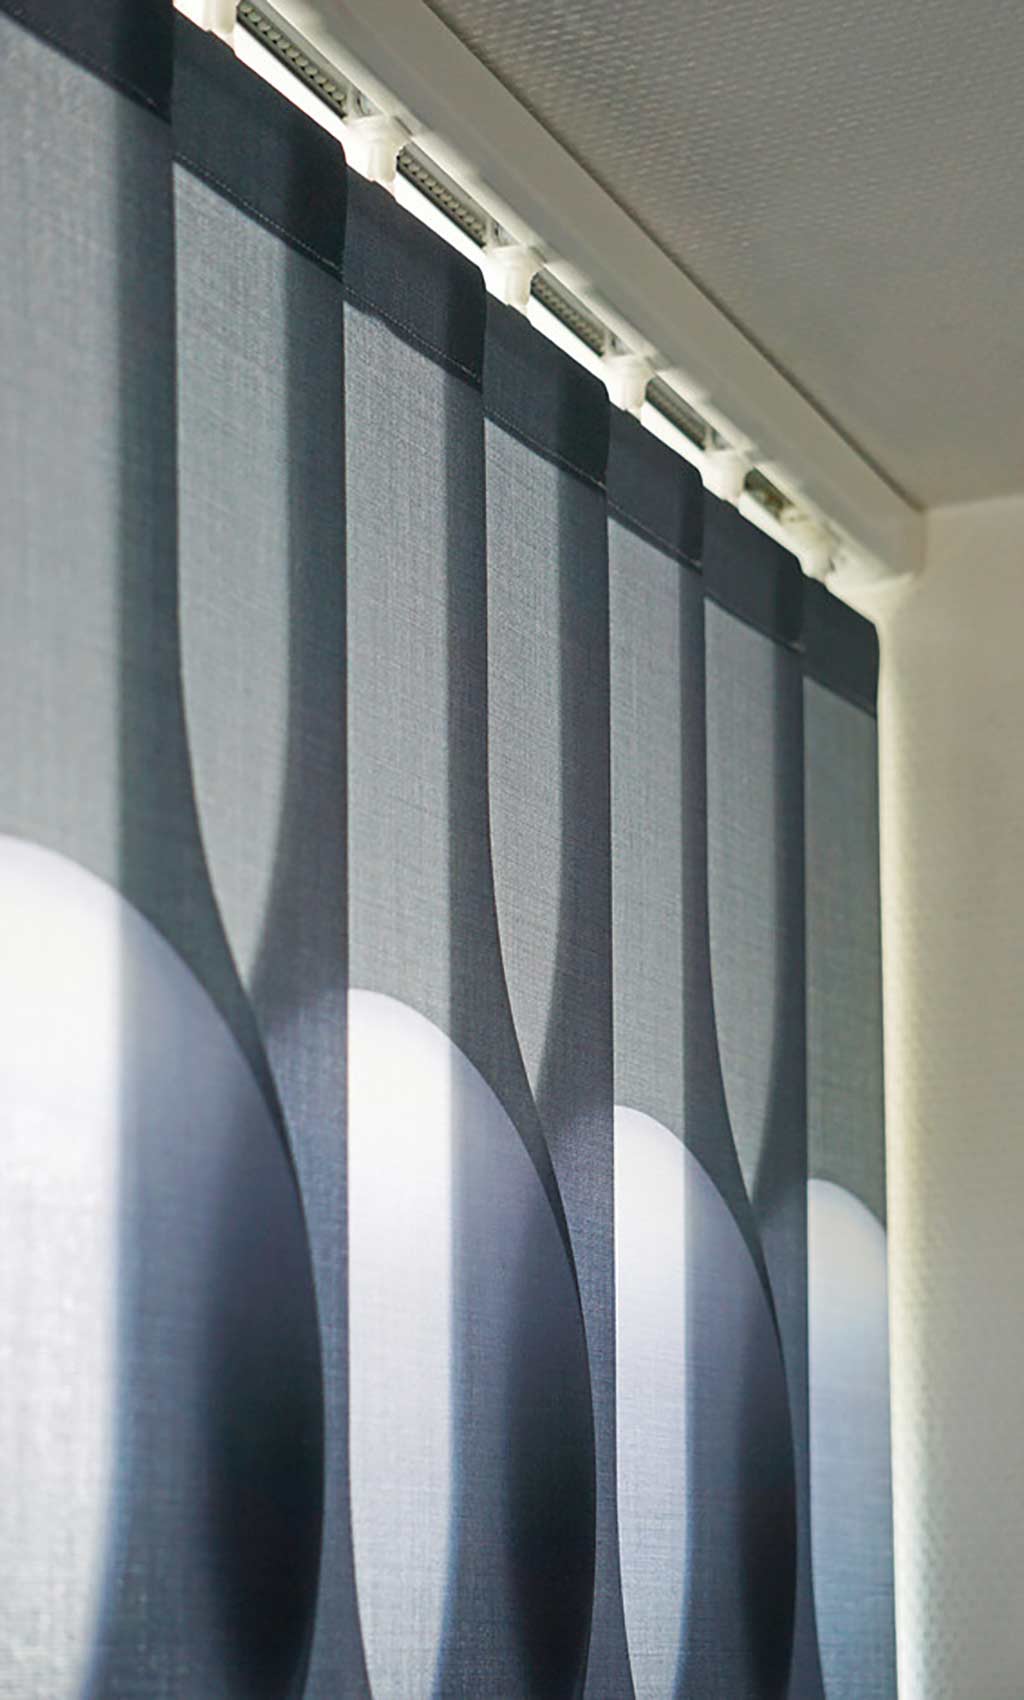 Domestic shaped vertical blinds